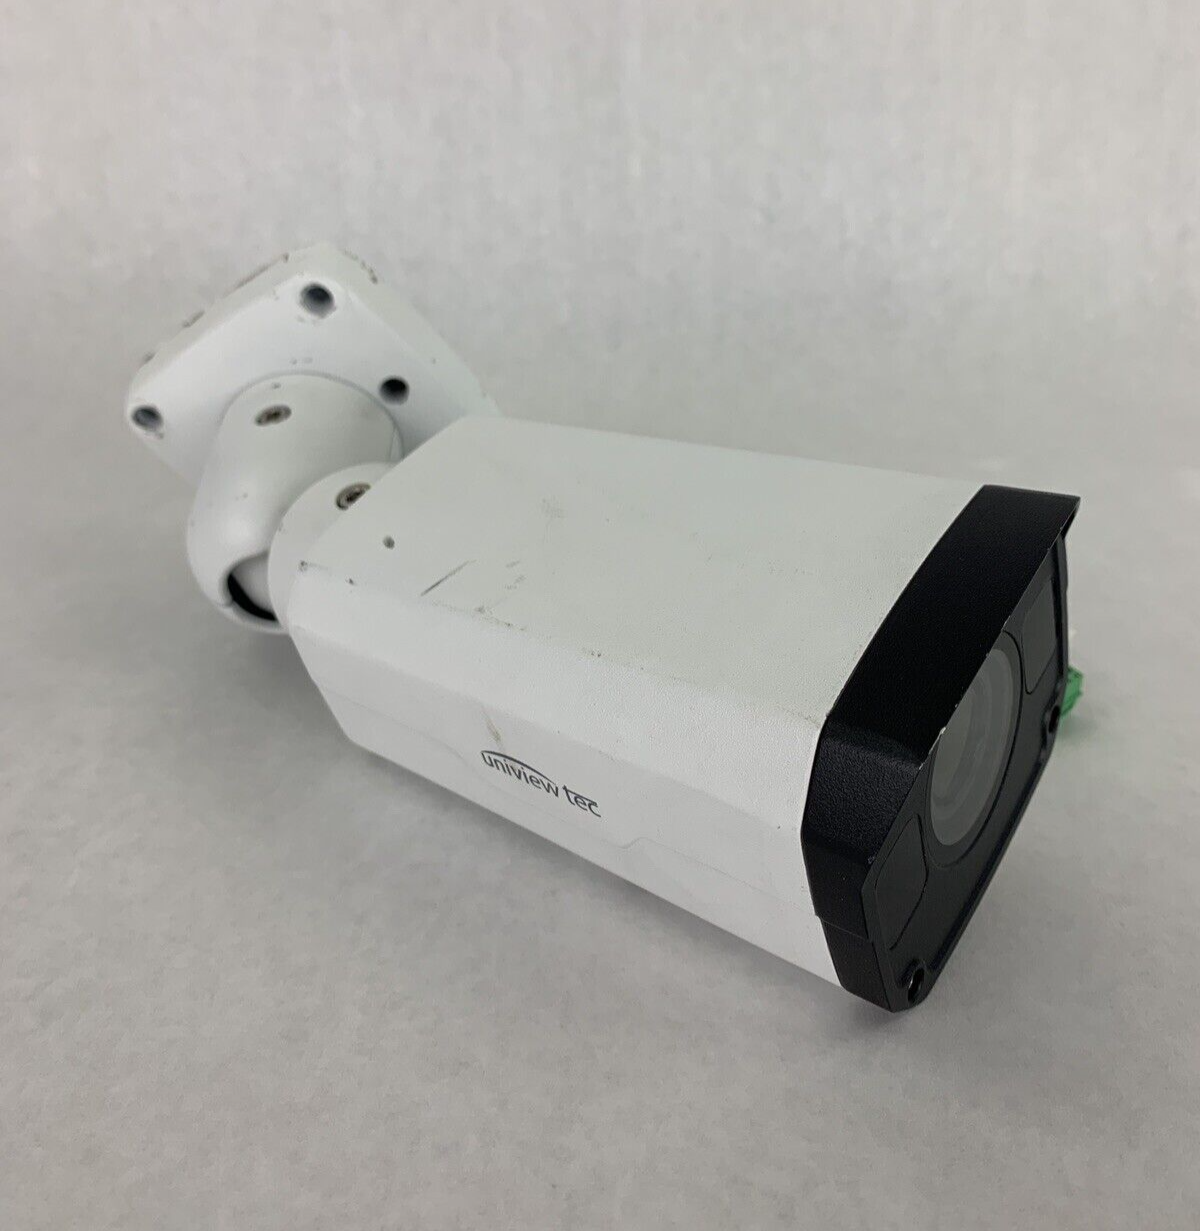 Uniview Technology IPB5213M 5MP WDR Lighthunter Bullet Camera Tested